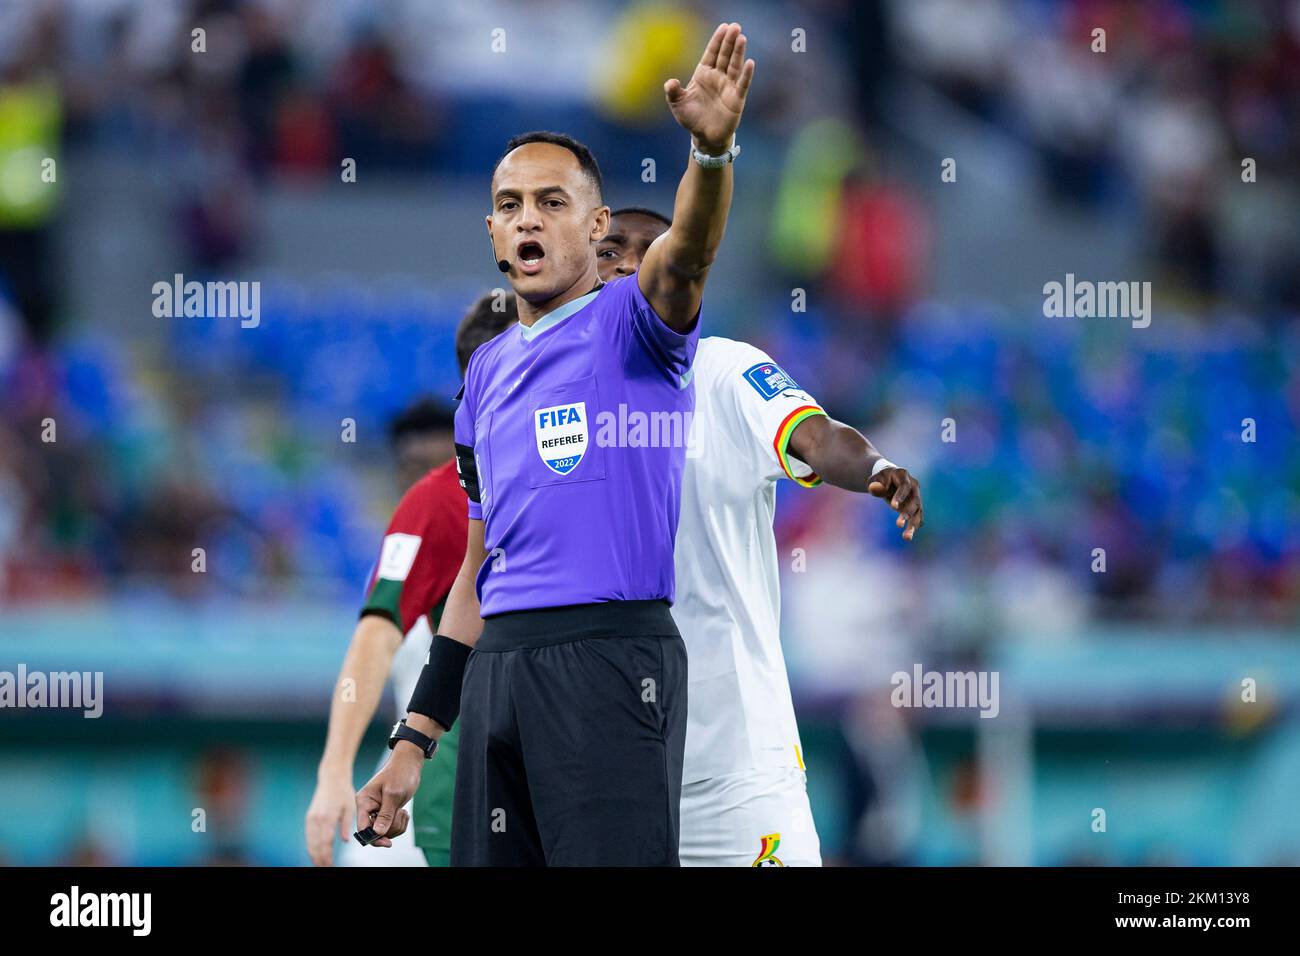 Doha, Qatar. 24th Nov, 2022. Soccer: World Cup, Portugal - Ghana, preliminary round, Group H, Matchday 1, Stadium 974, referee Ismail Elfath gesticulates. Credit: Tom Weller/dpa/Alamy Live News Stock Photo